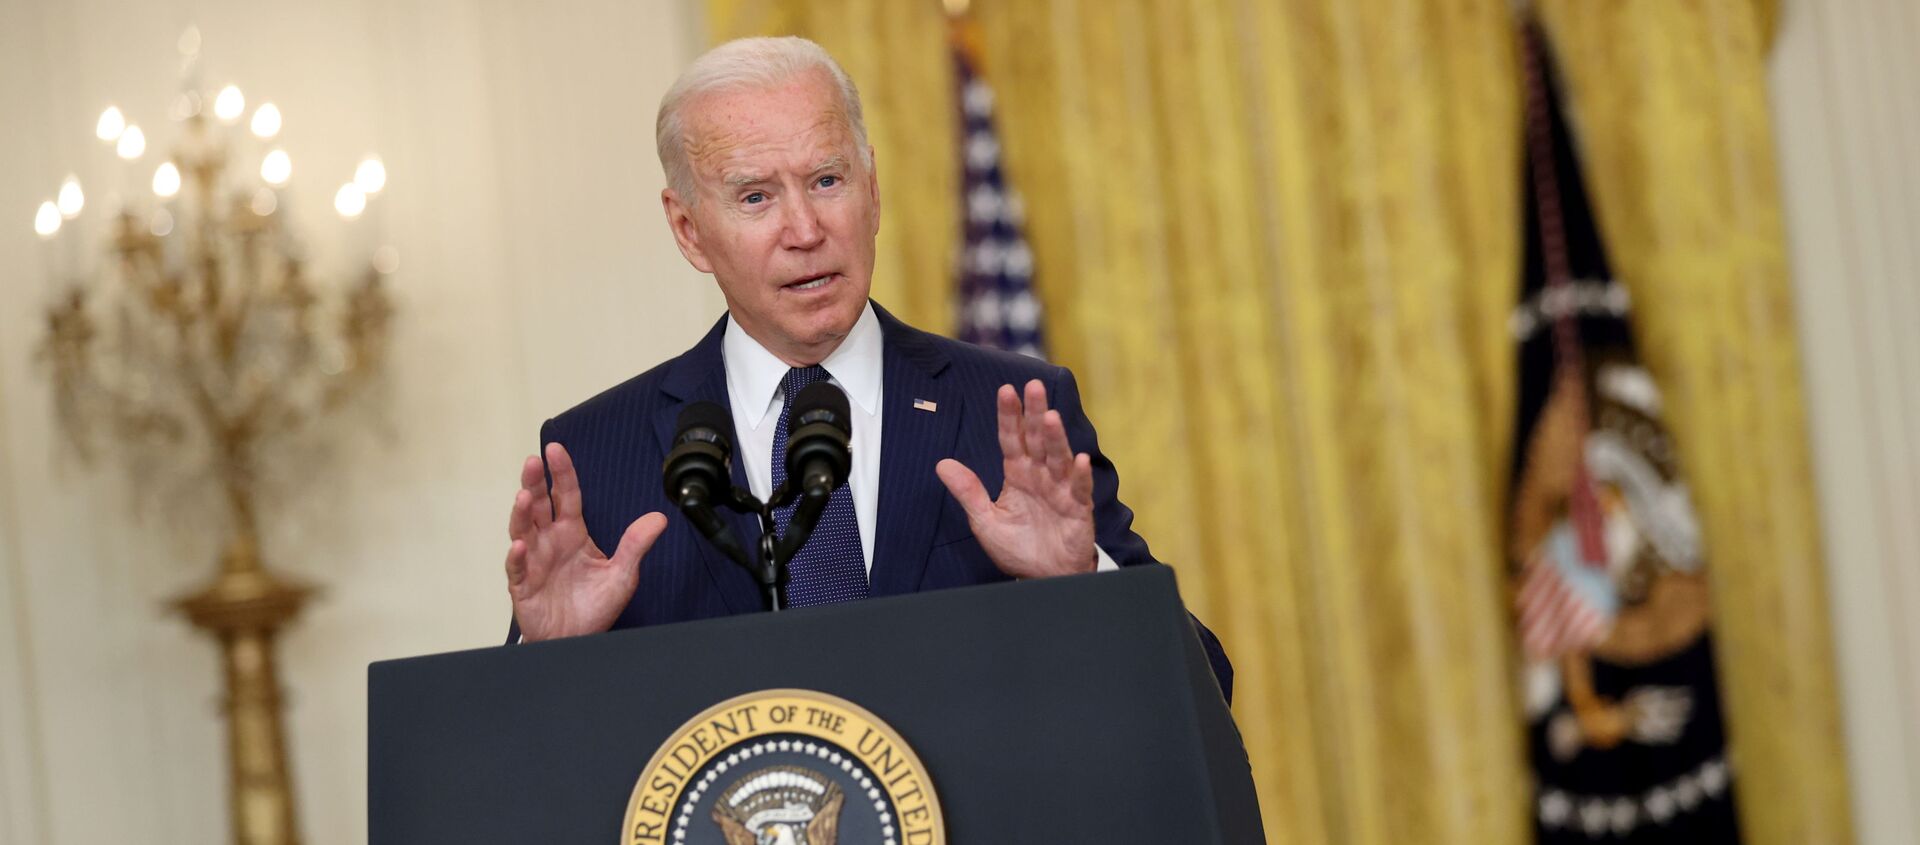 U.S. President Joe Biden delivers remarks about Afghanistan, from the East Room of the White House in Washington, U.S. August 26, 2021 - Sputnik International, 1920, 26.08.2021